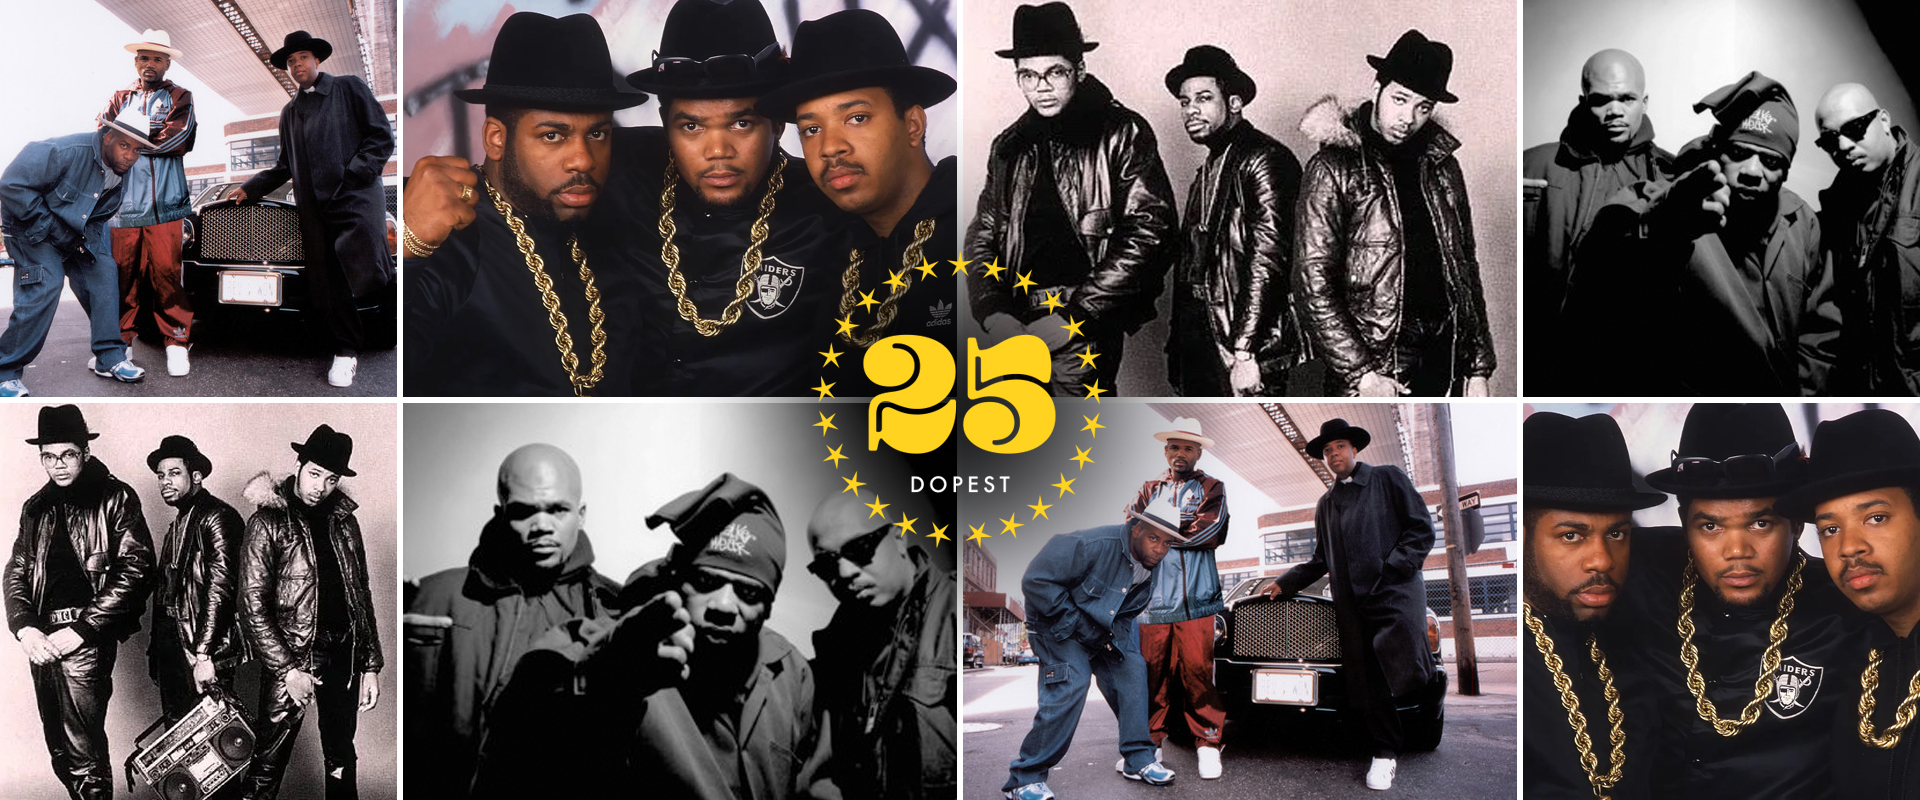 It's Like That: The 25 Dopest Run-D.M.C. Songs